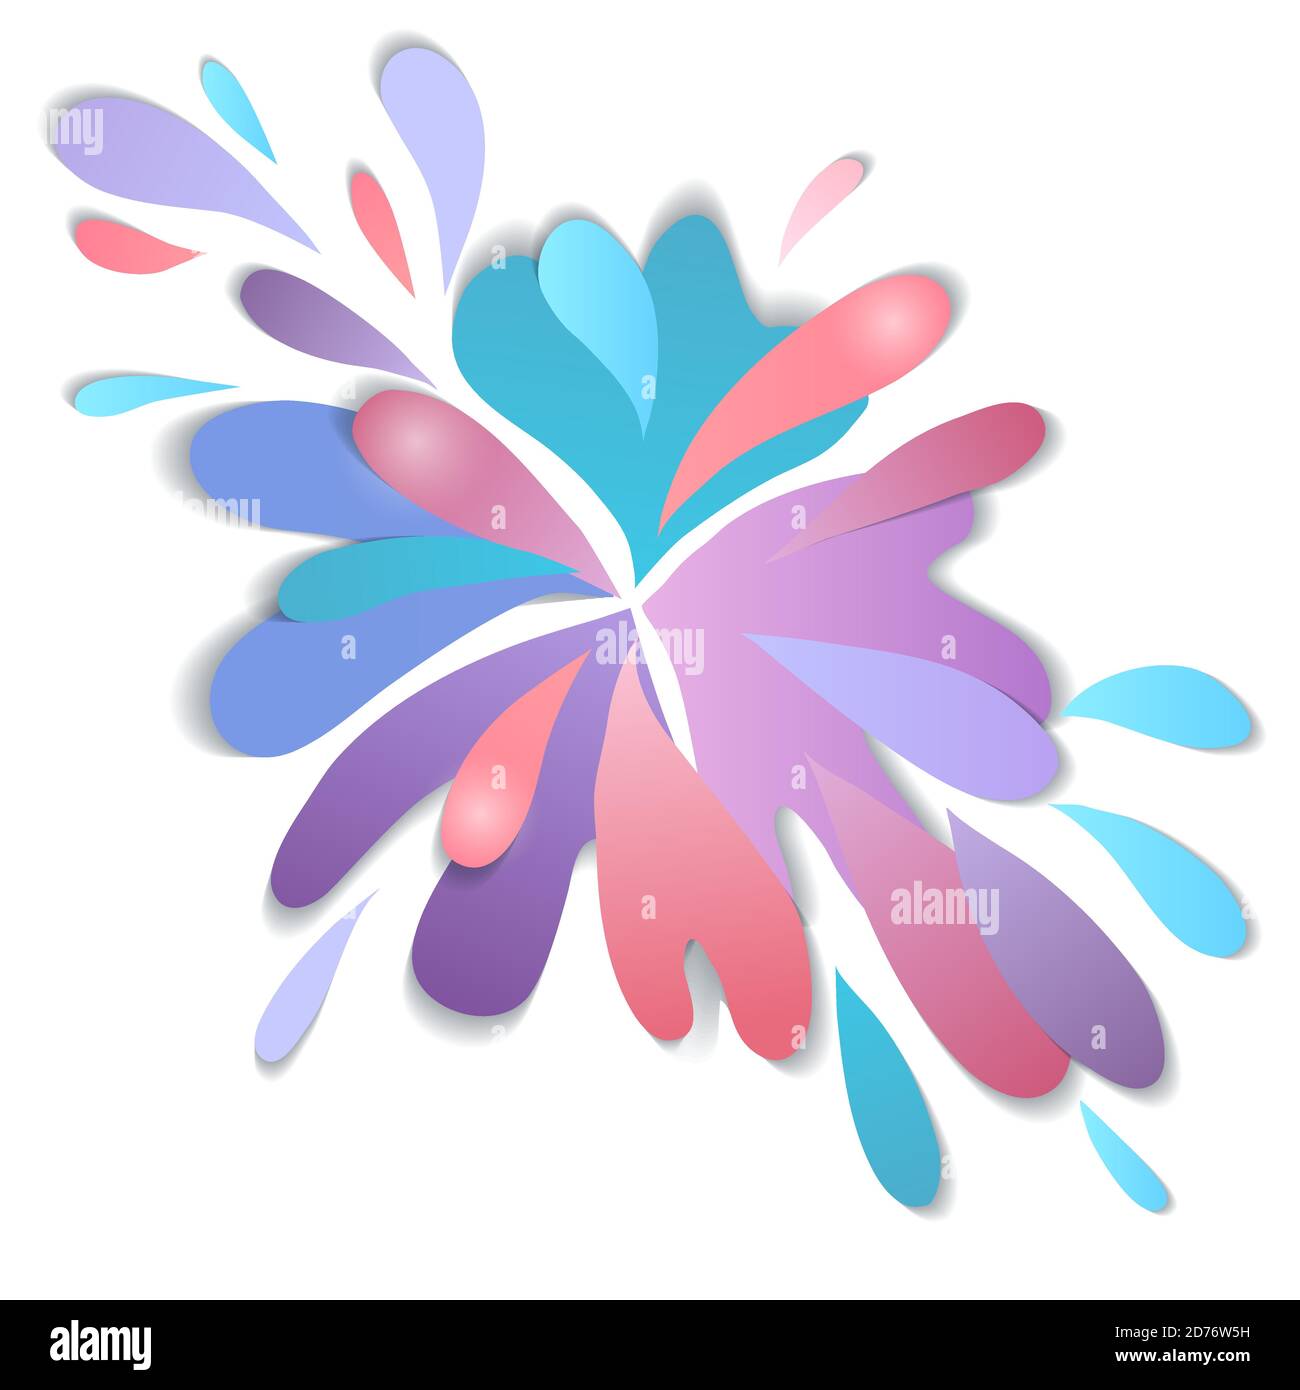 3d colorful paper background origami style Vector Image